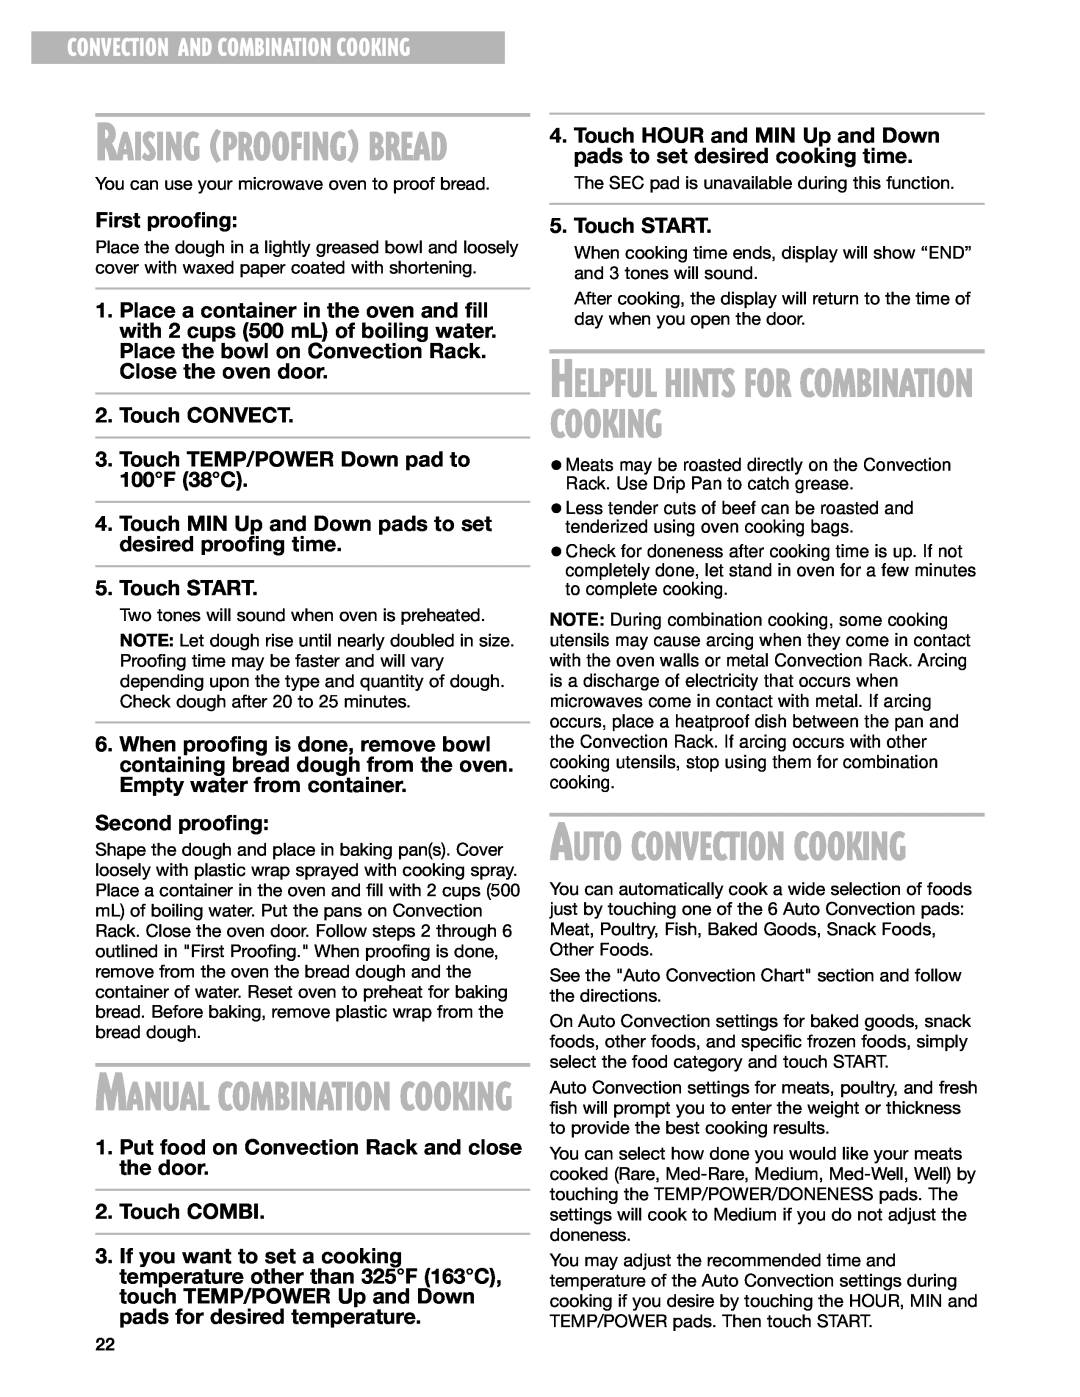 Whirlpool GM8155XJ Helpful Hints For Combination Cooking, Auto Convection Cooking, Raising Proofing Bread, First proofing 